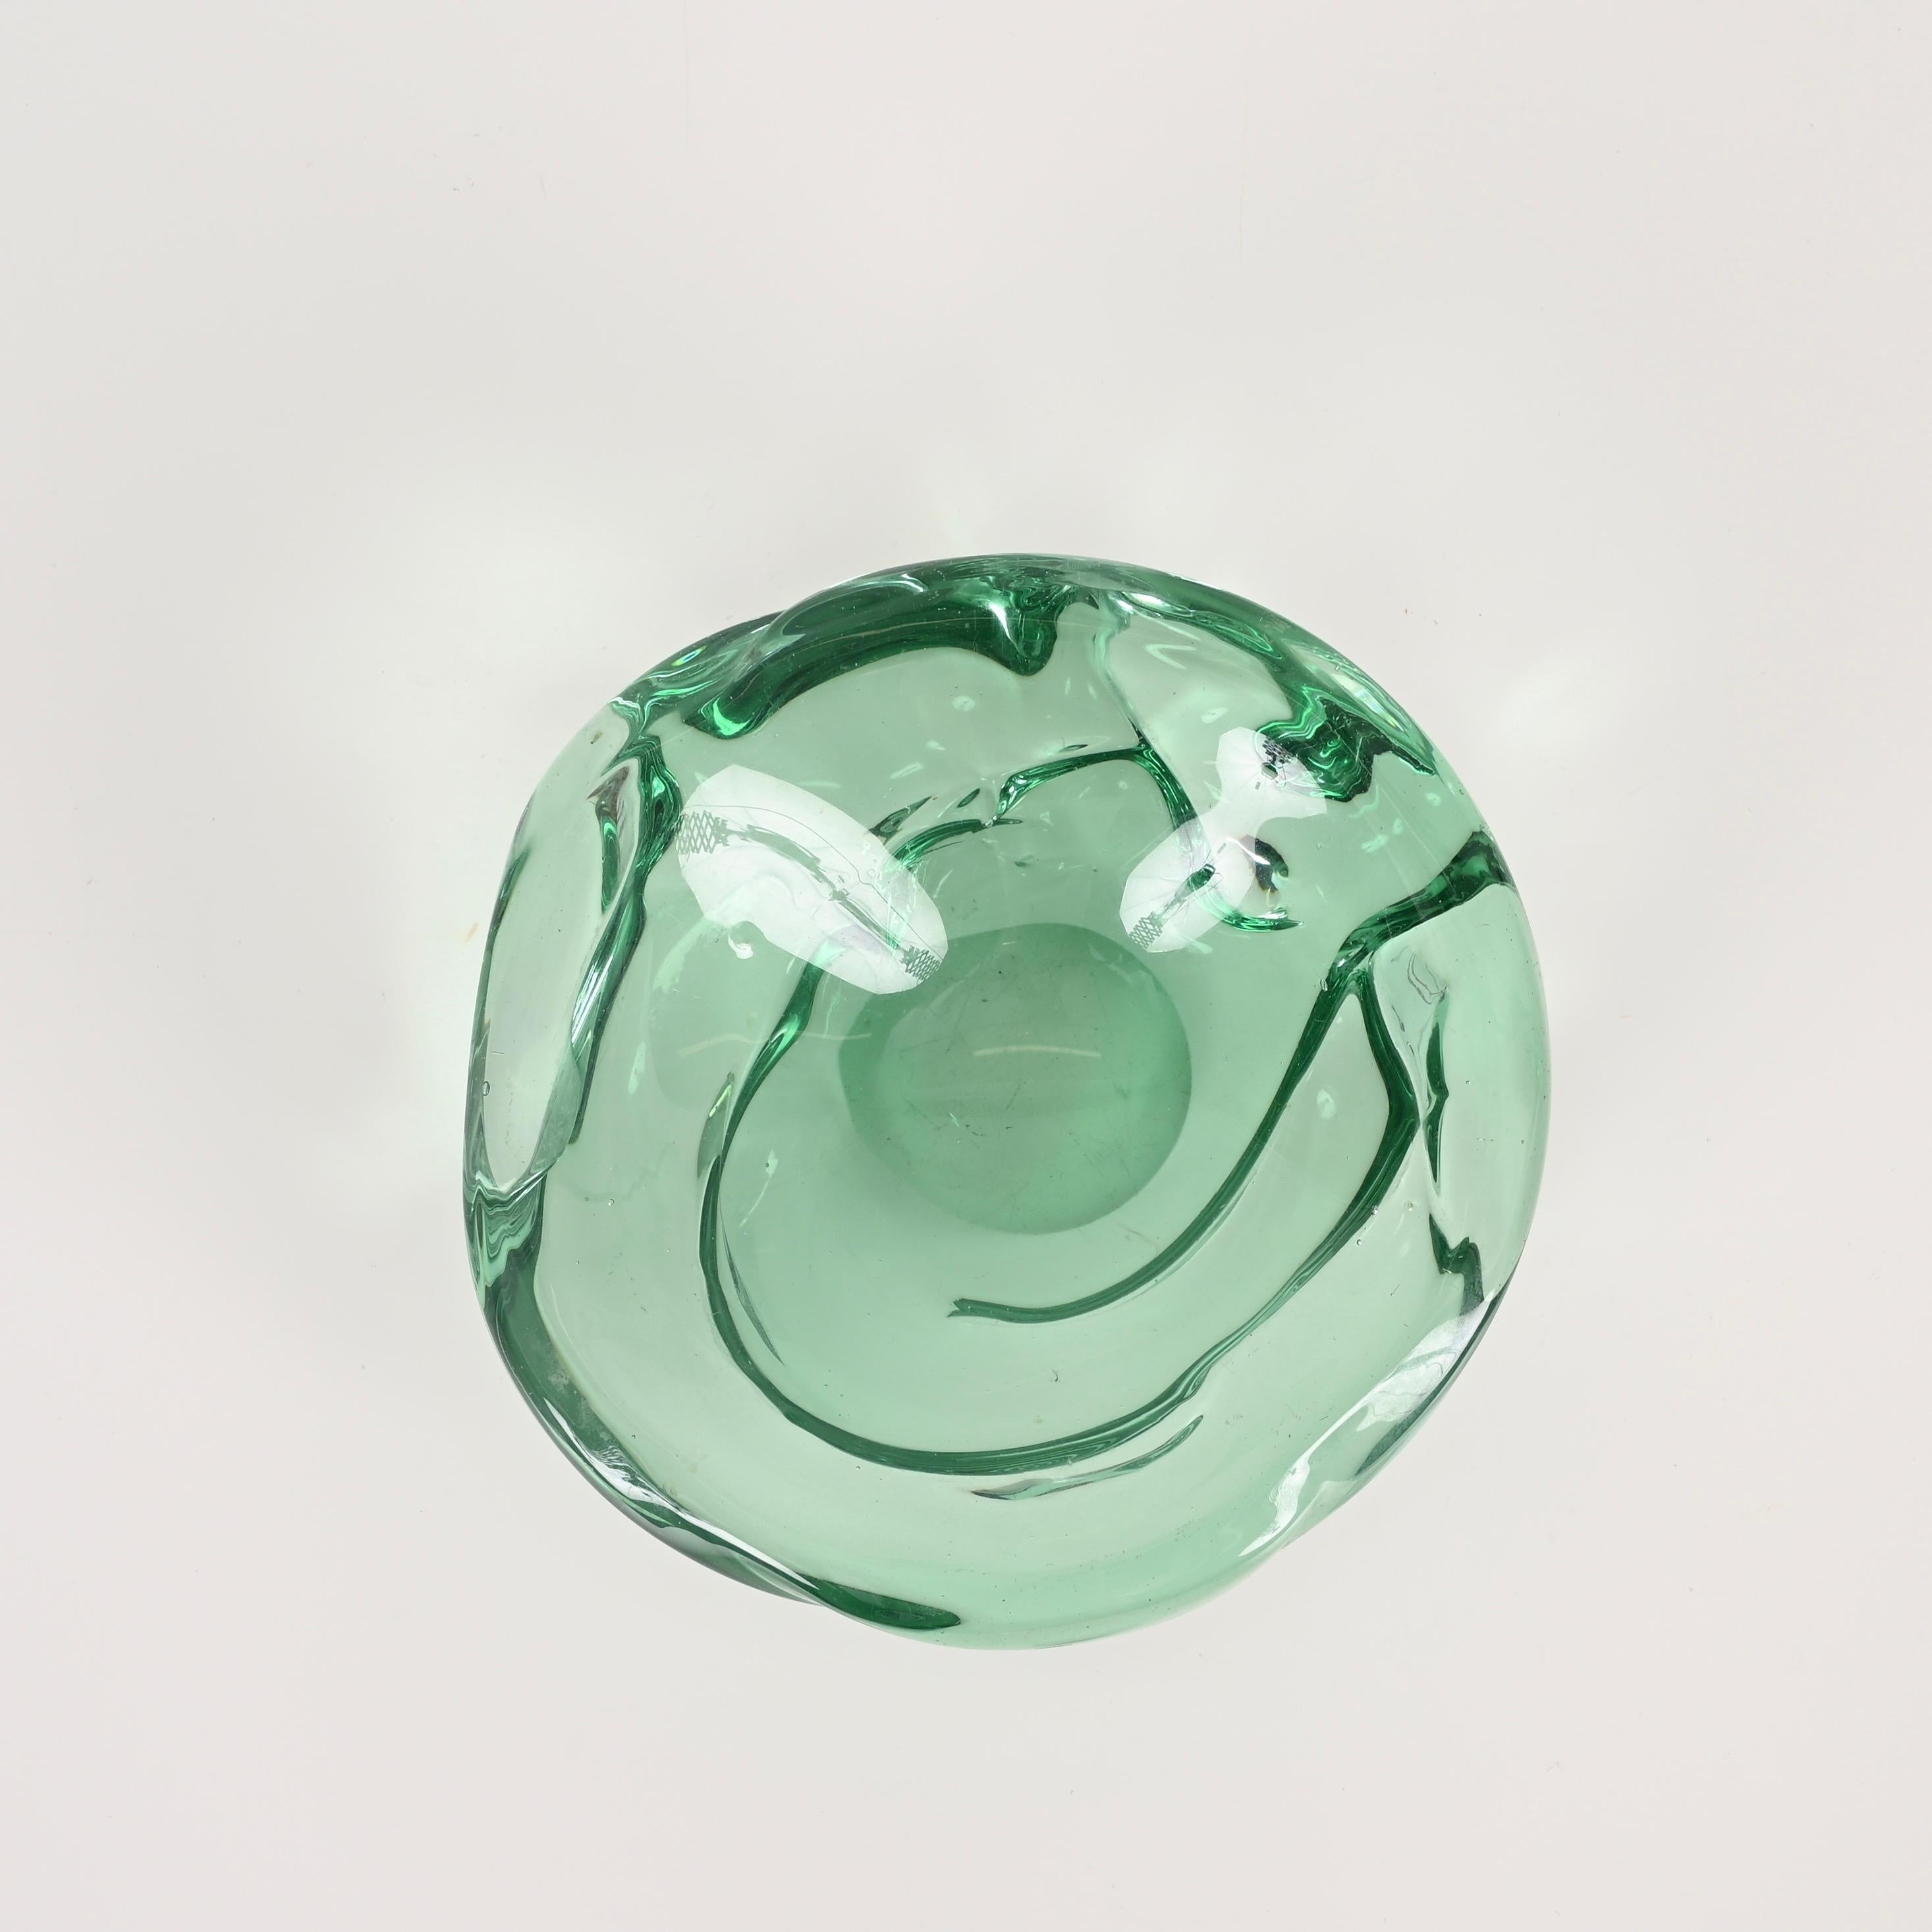 Hand-Crafted Green Murano Sommerso Glass Bowl Signed by Archimede Seguso, Italy, 1960s For Sale